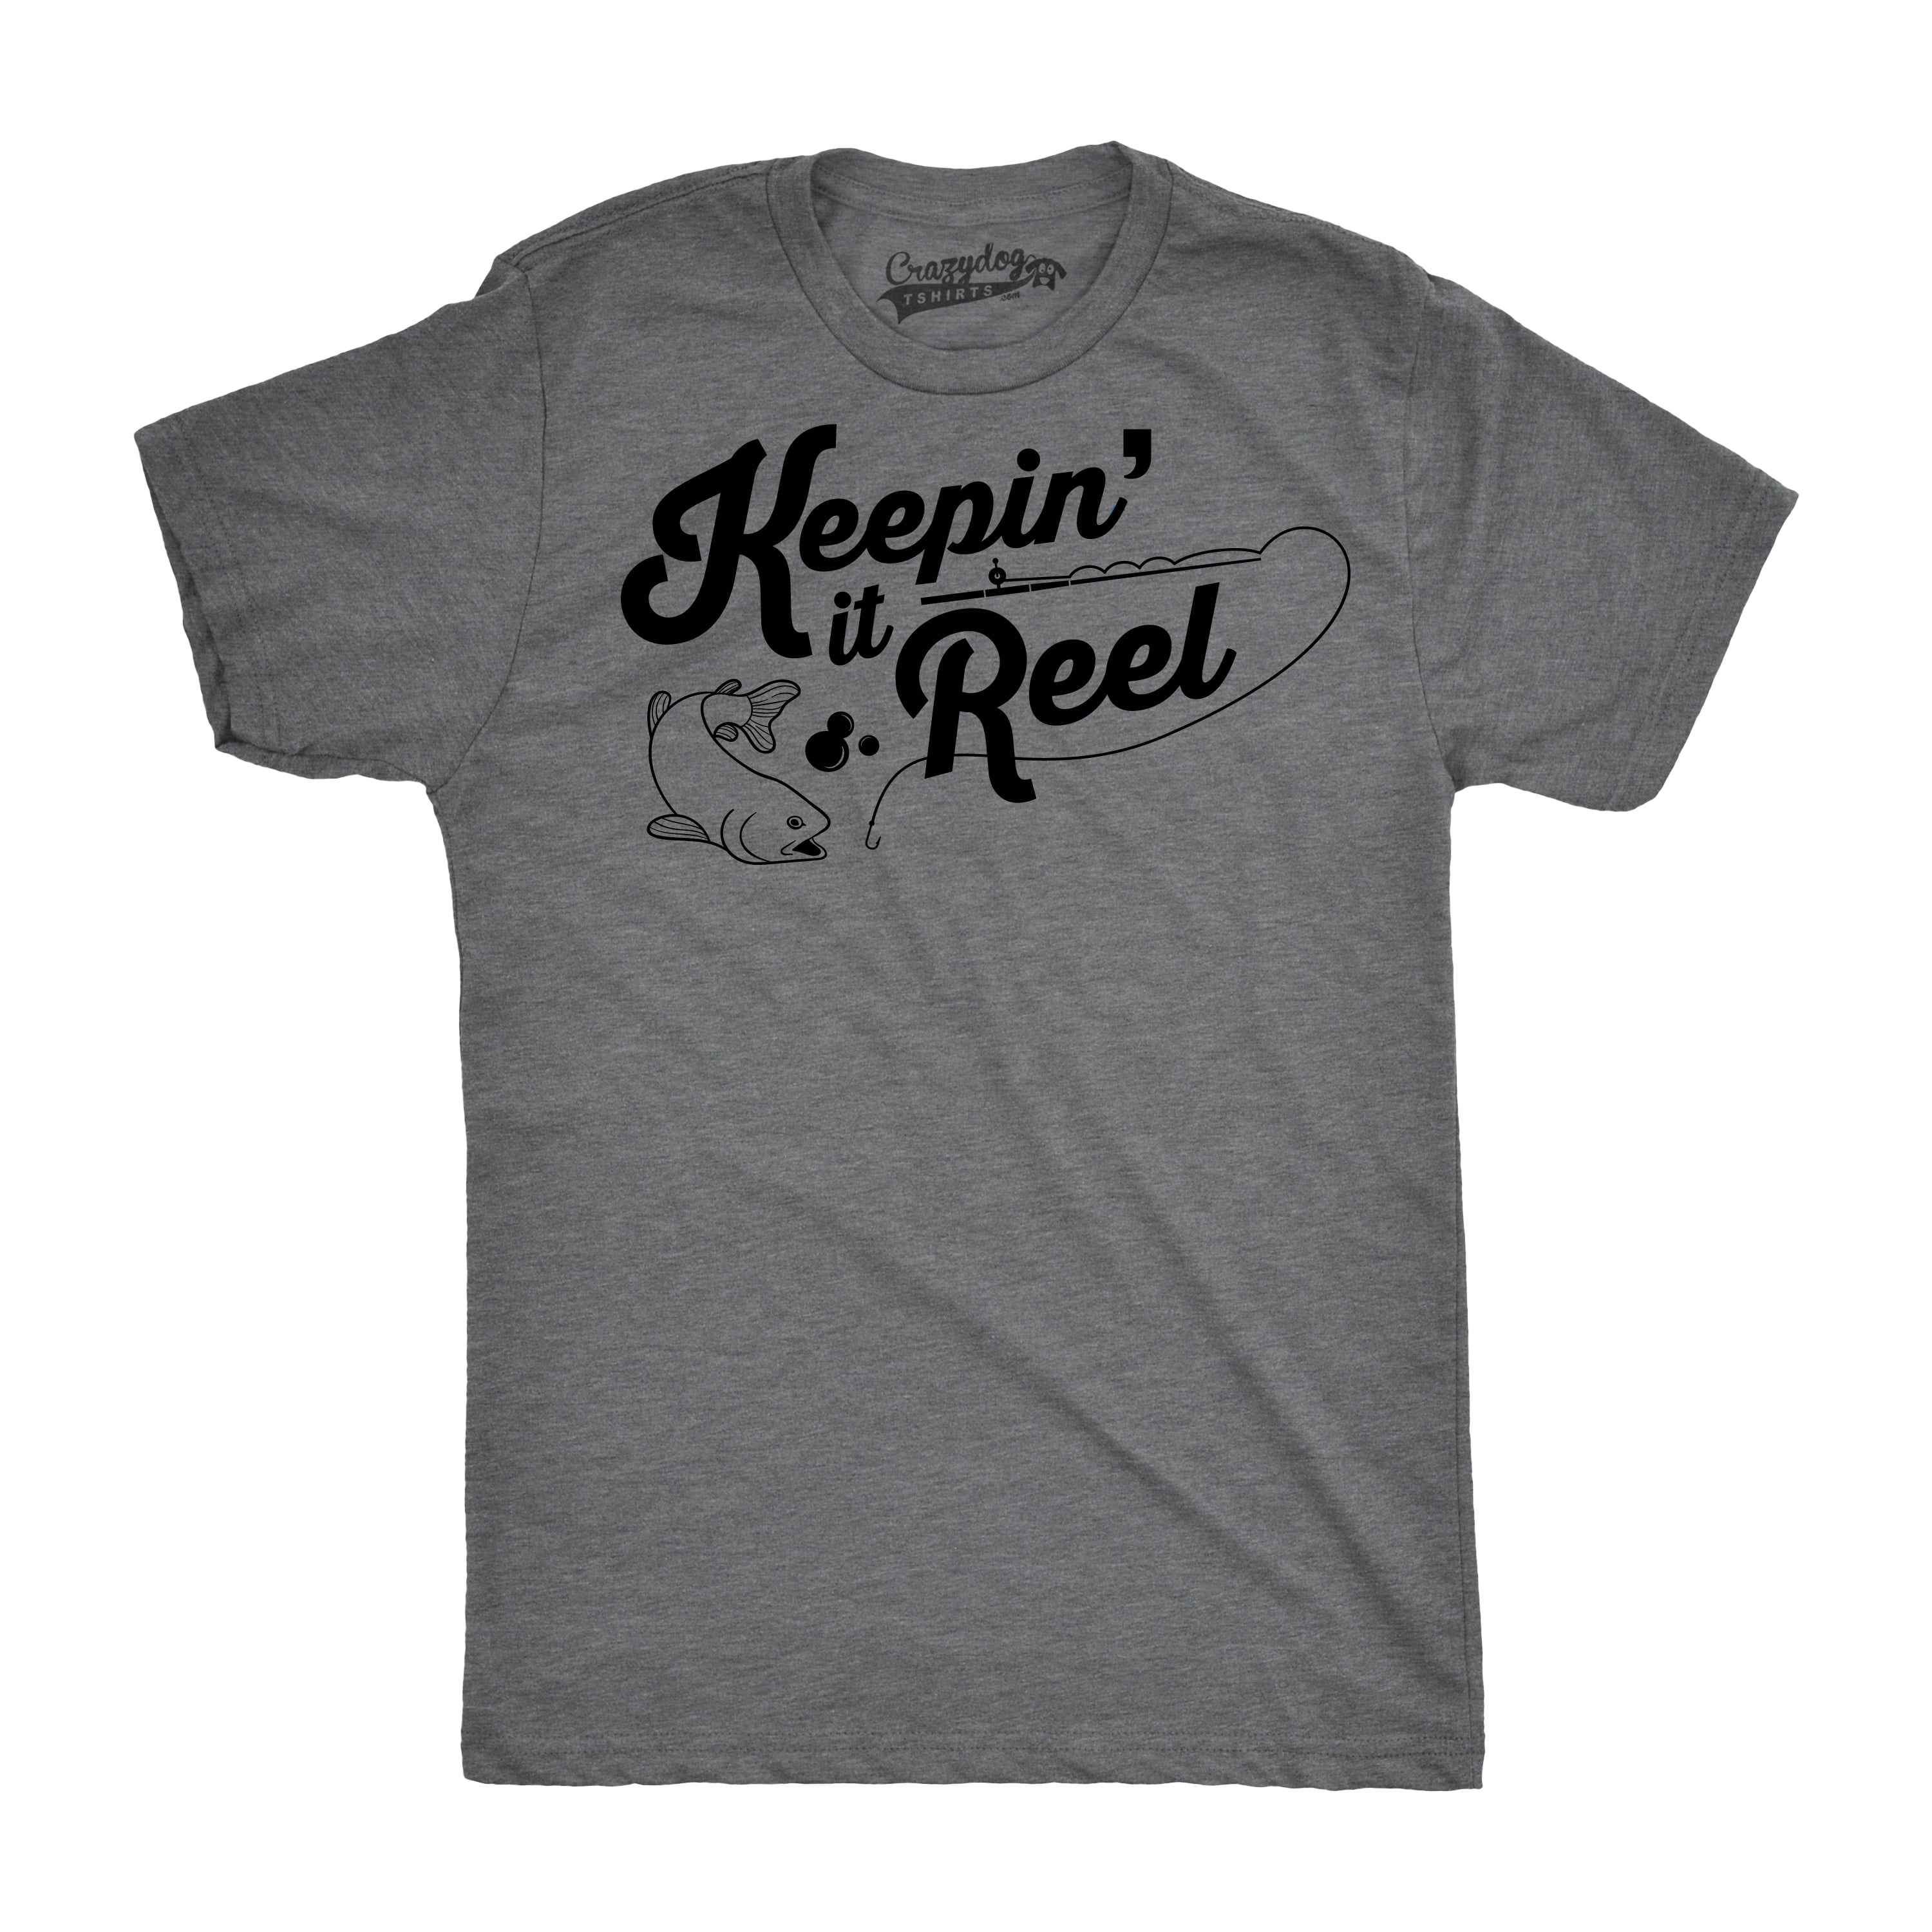 Mens Keepin It Reel T shirt Funny Cool Fishing Gift for Fisherman Humor Graphic  Graphic Tees 